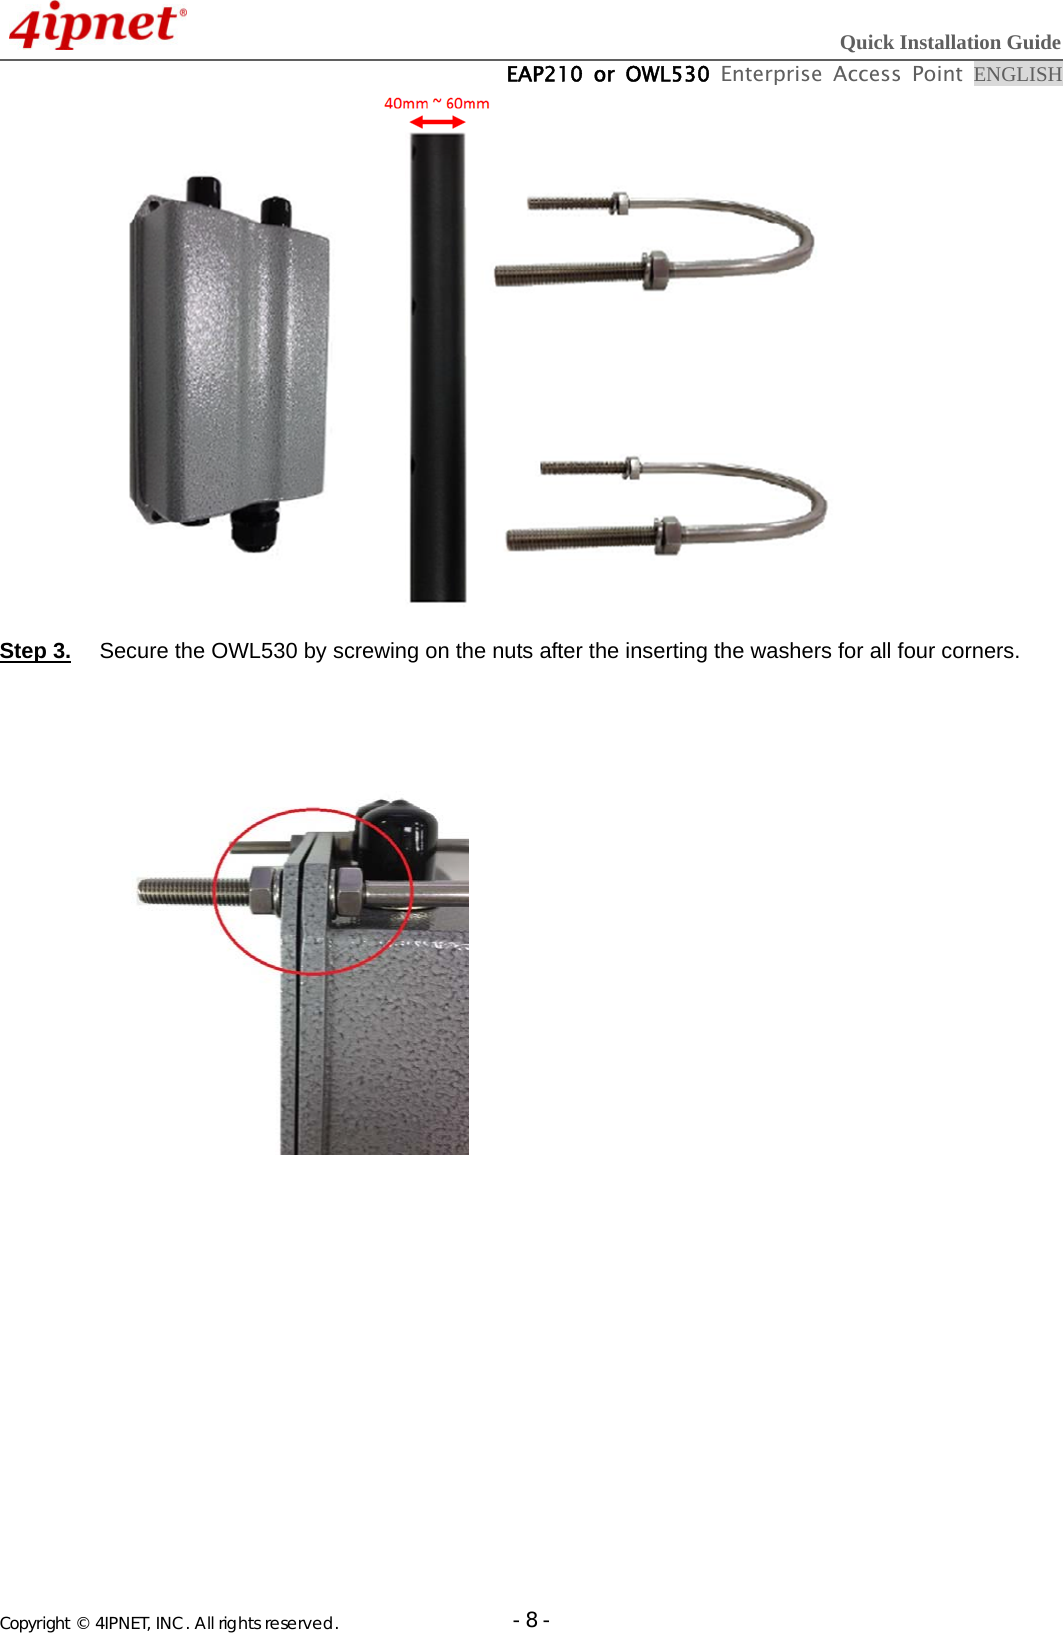  Quick Installation Guide  EAP210 or OWL530 Enterprise Access Point ENGLISH Copyright © 4IPNET, INC. All rights reserved.                       - 8 -    Step 3.  Secure the OWL530 by screwing on the nuts after the inserting the washers for all four corners.   